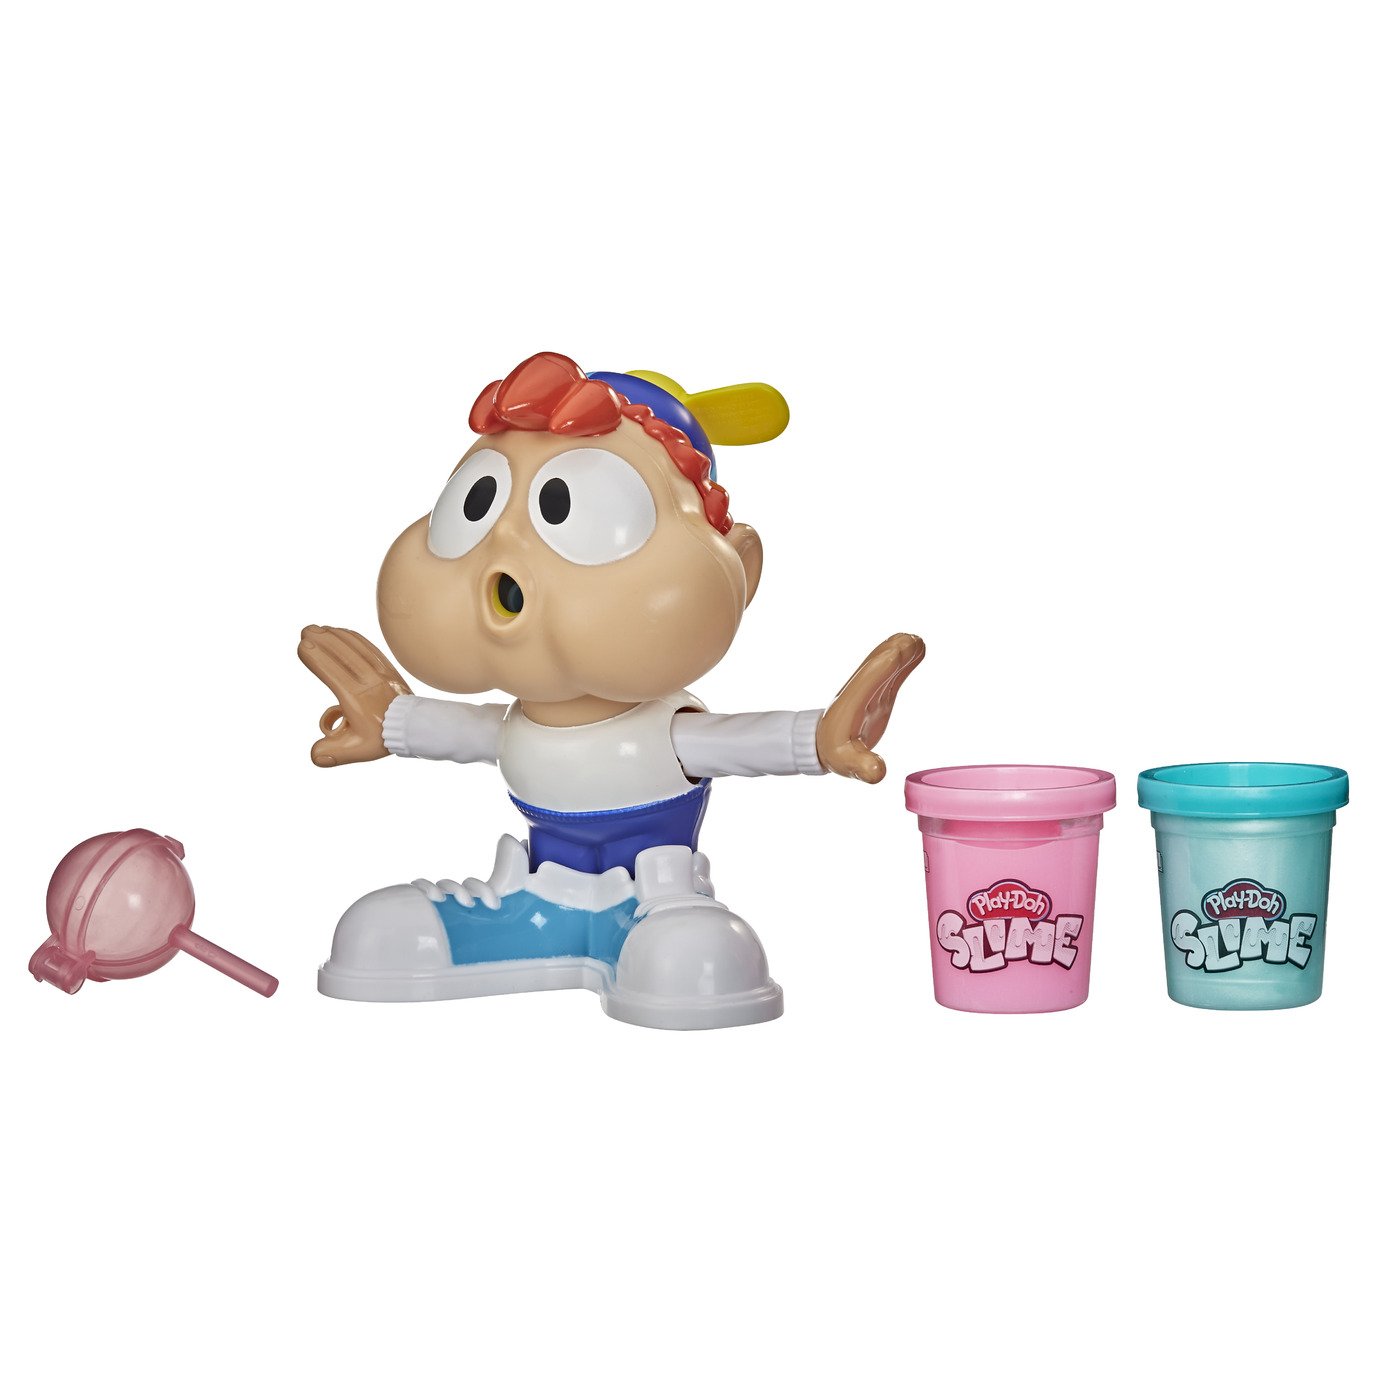 Play-Doh Slime Chewin' Charlie Slime Bubble Maker Toy Review